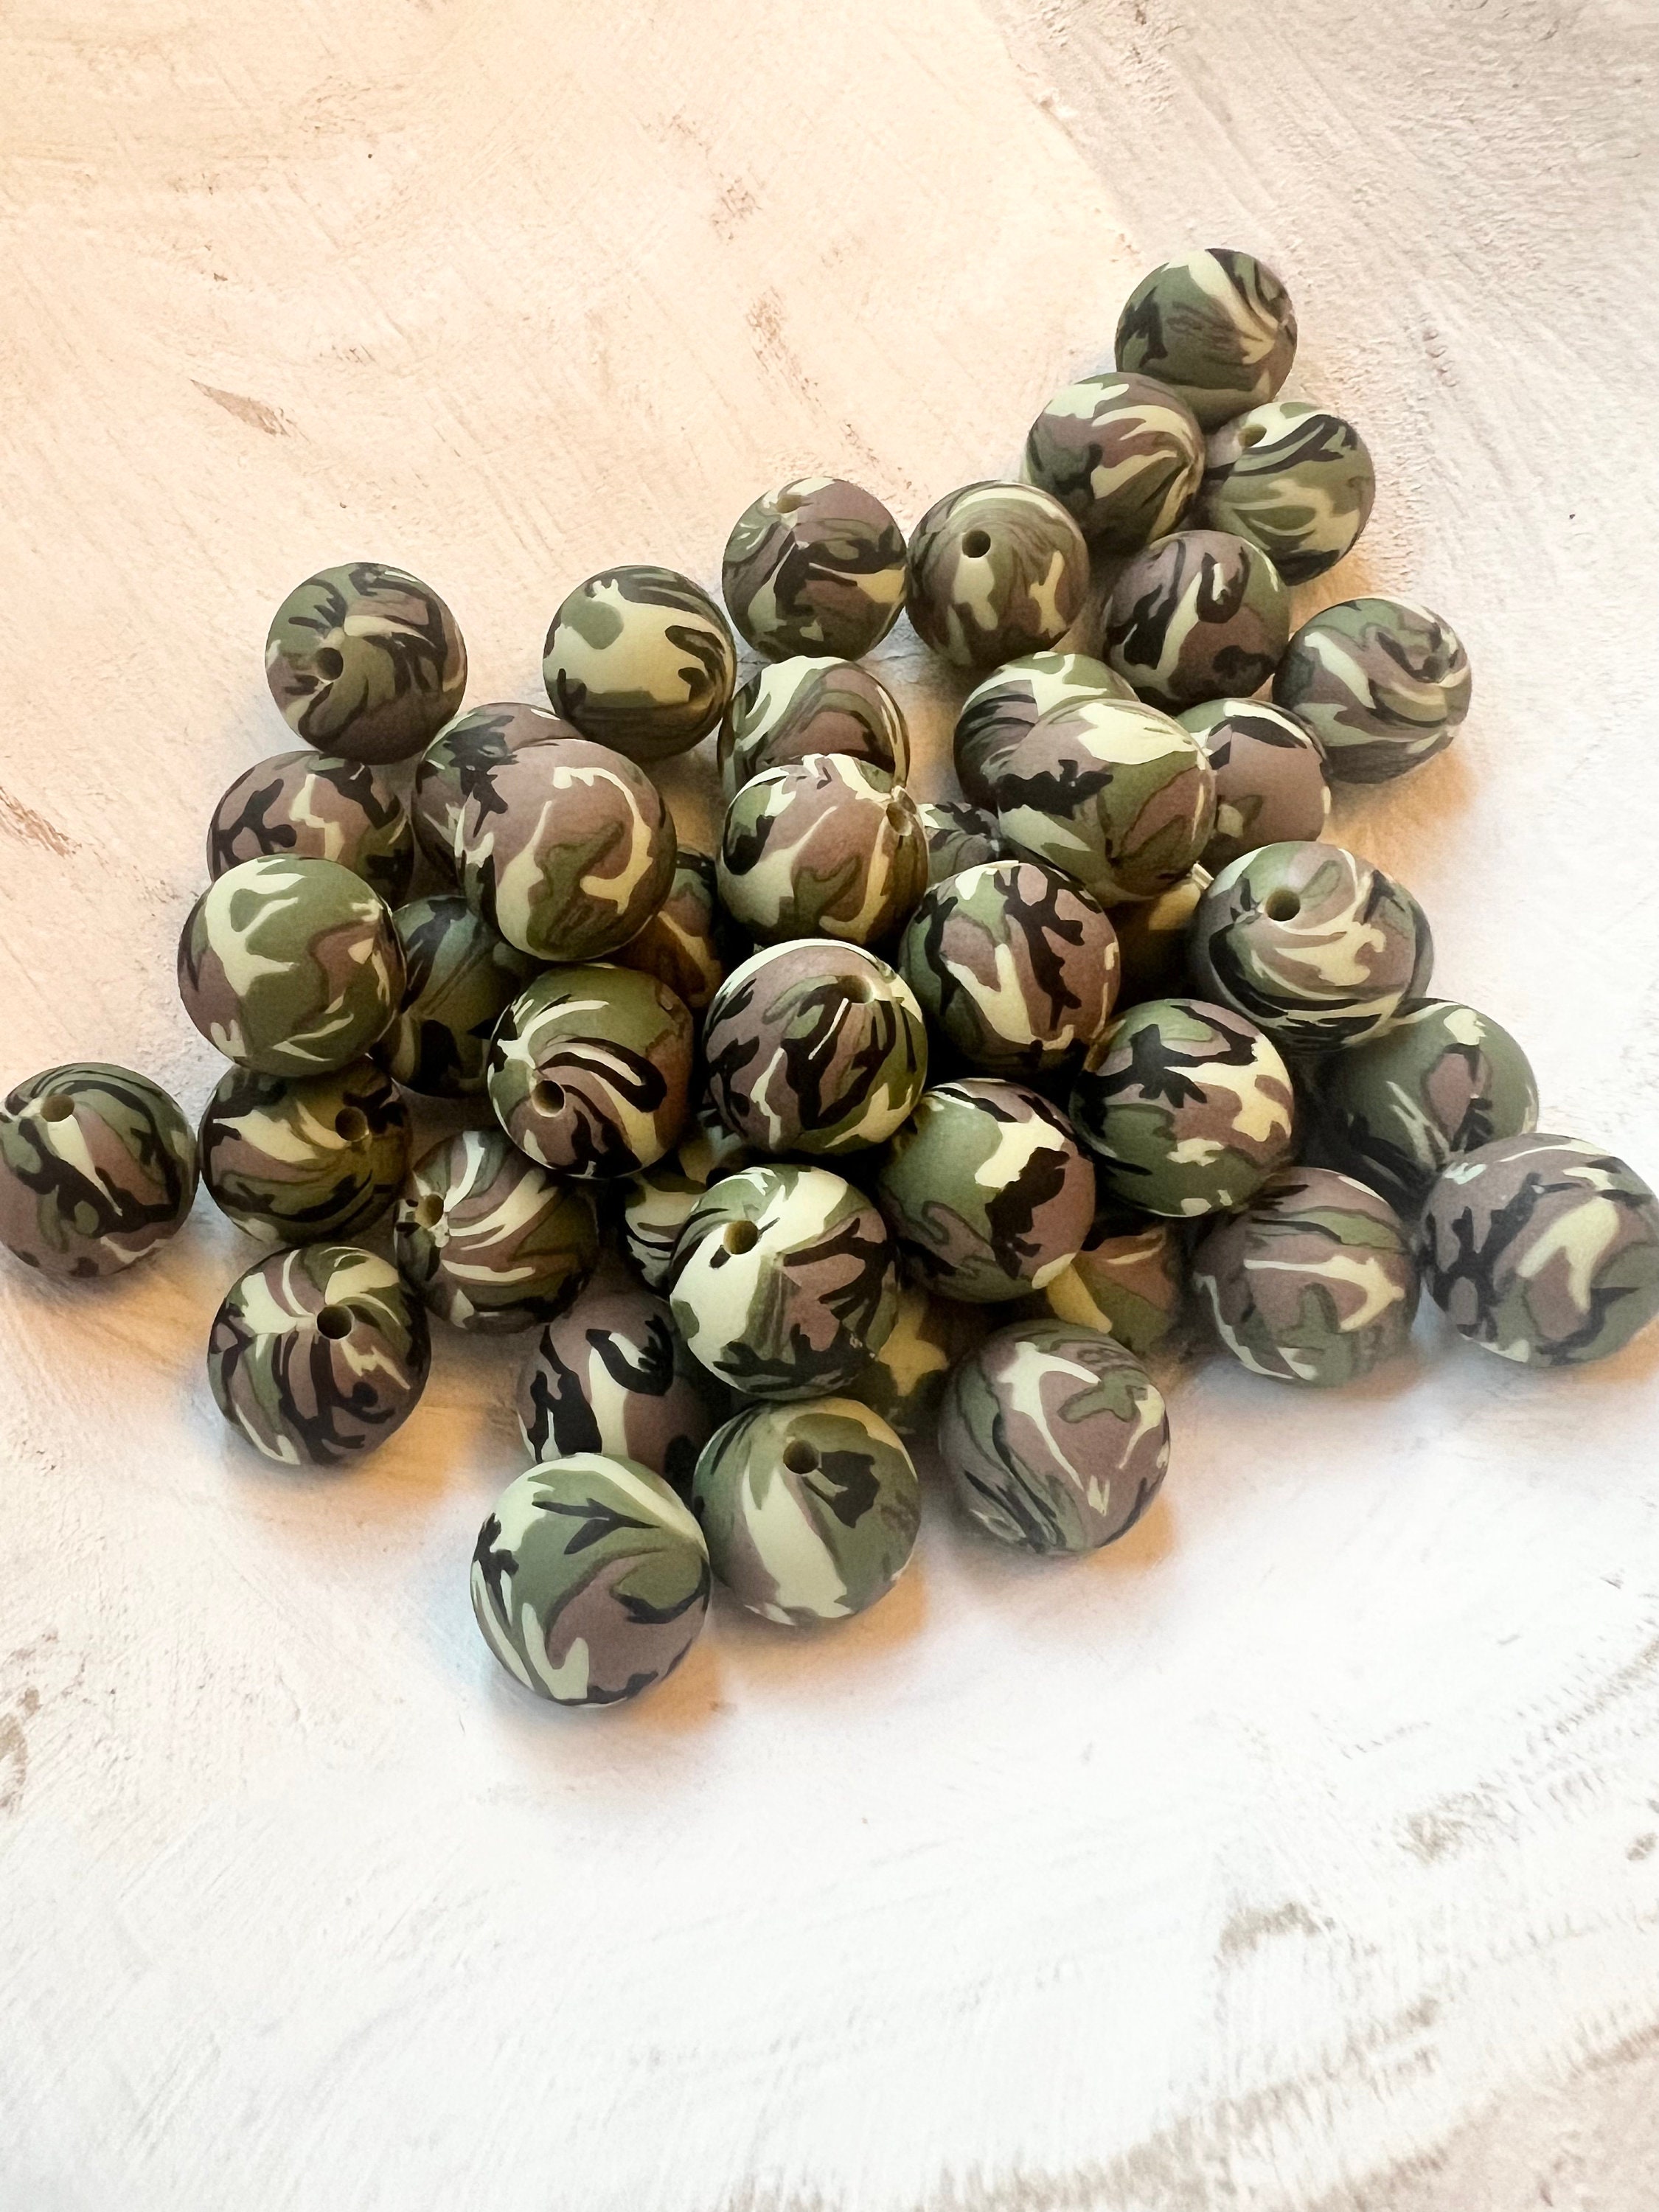 Camo Print Silicone Beads, Mixed Lot Silicone Round Beads, DIY Necklace  Jewelry Making, Handcrafts Beads, 12/15mm Silicone Beads Bulk 